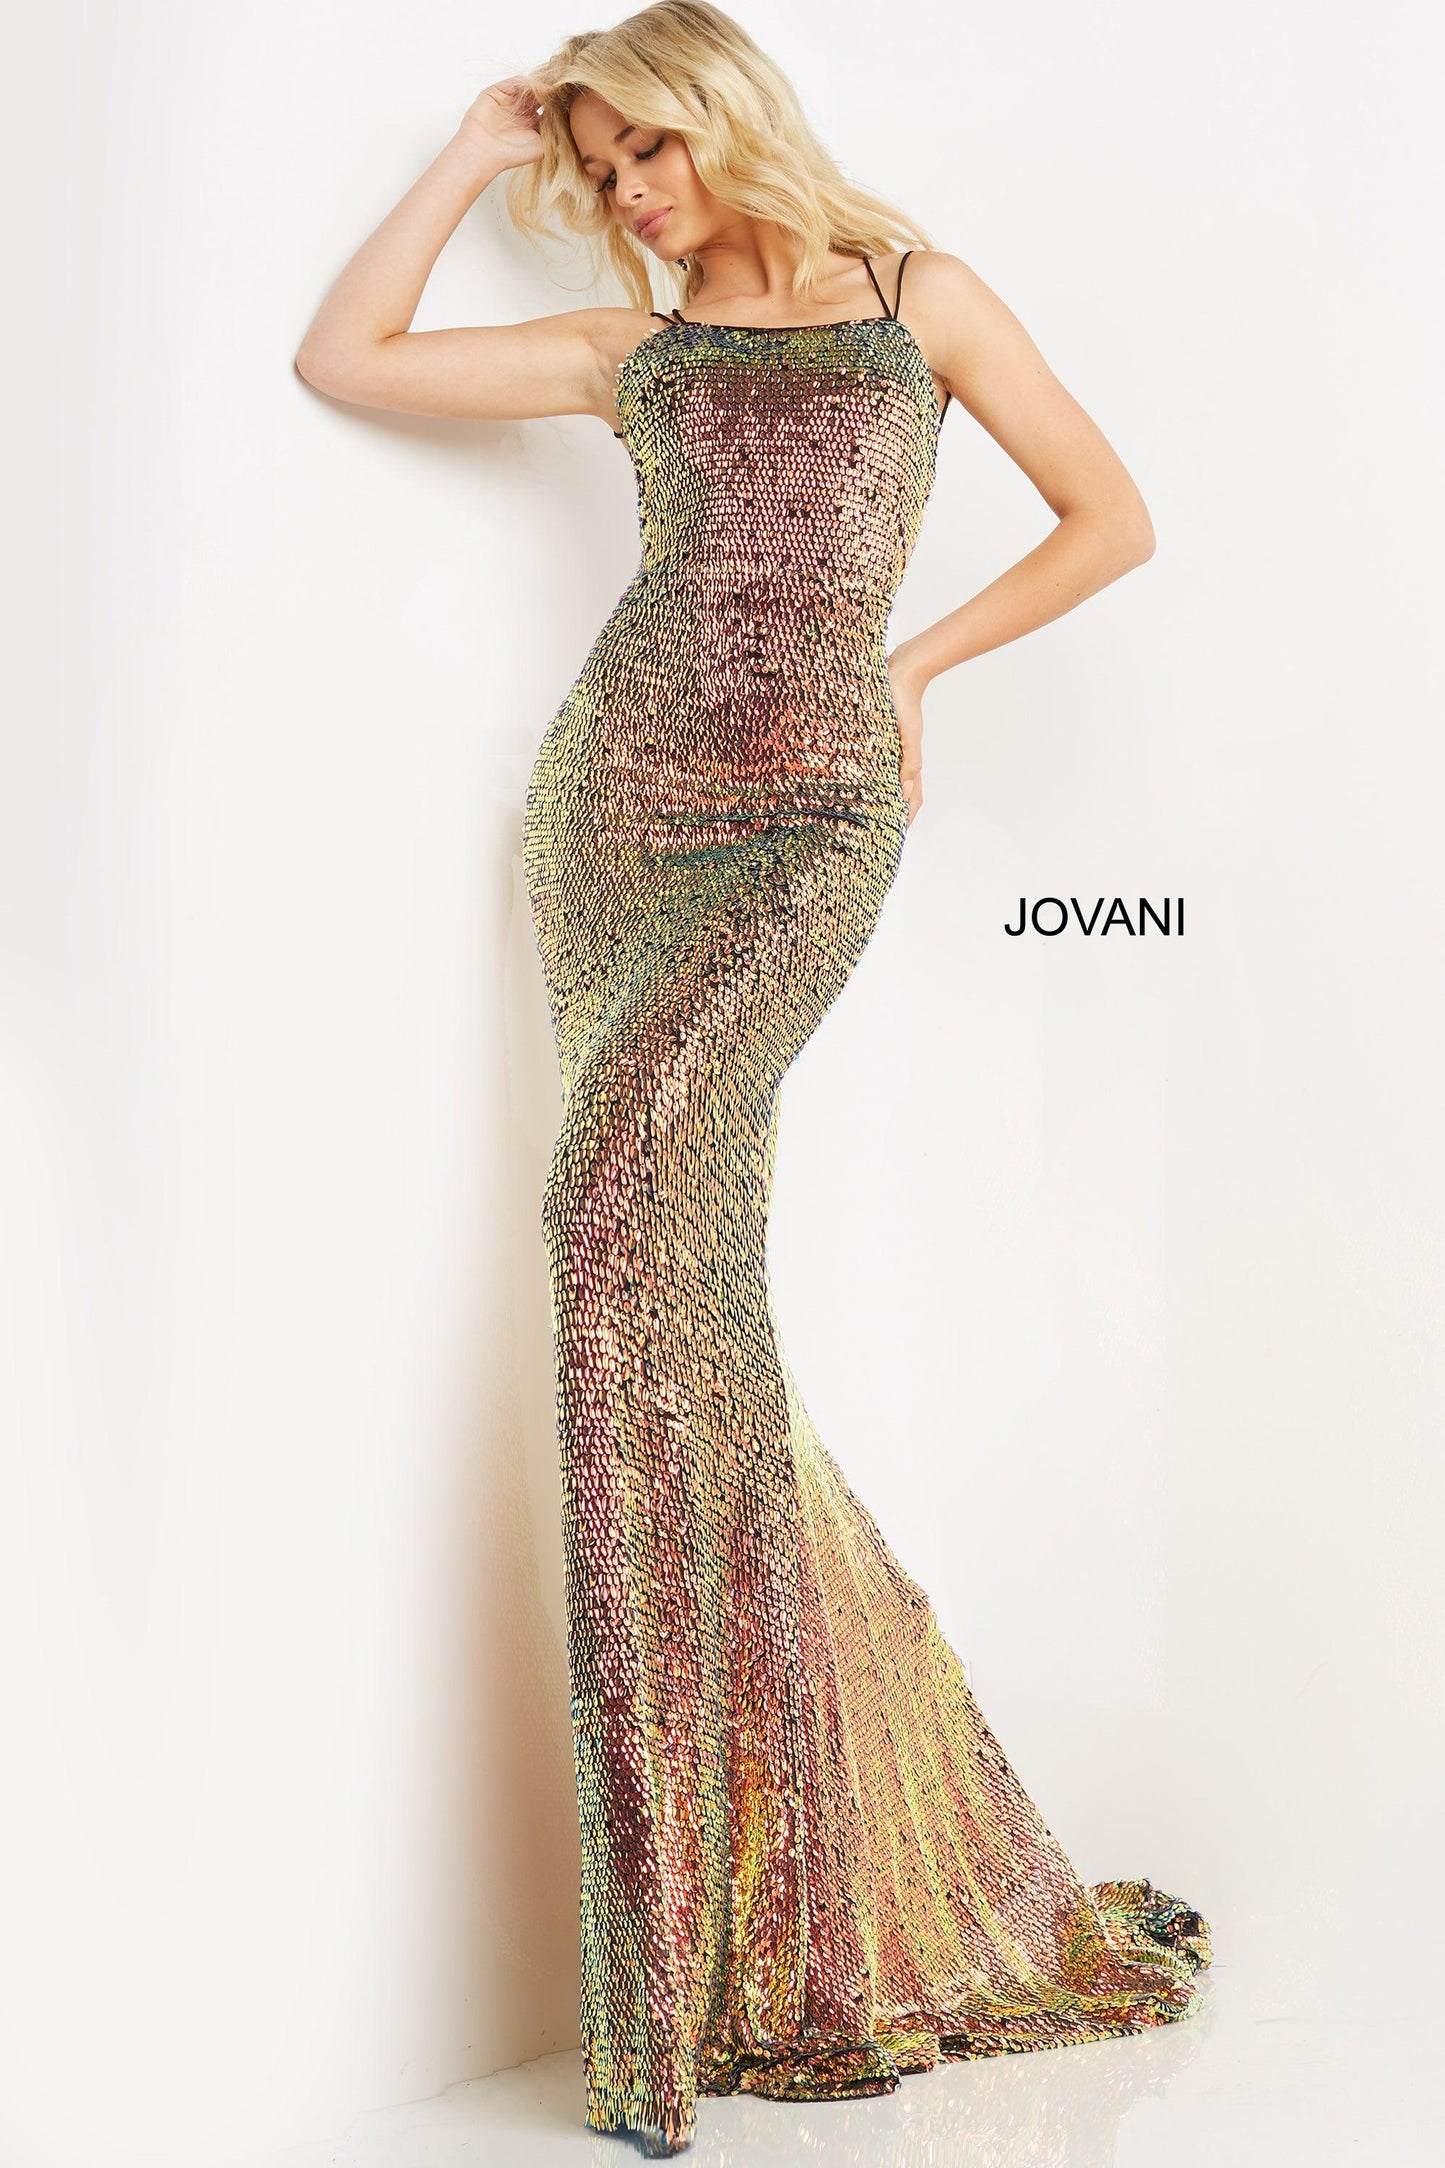 Jovani Spaghetti Strap Long Sexy Prom Gown 08472 - The Dress Outlet